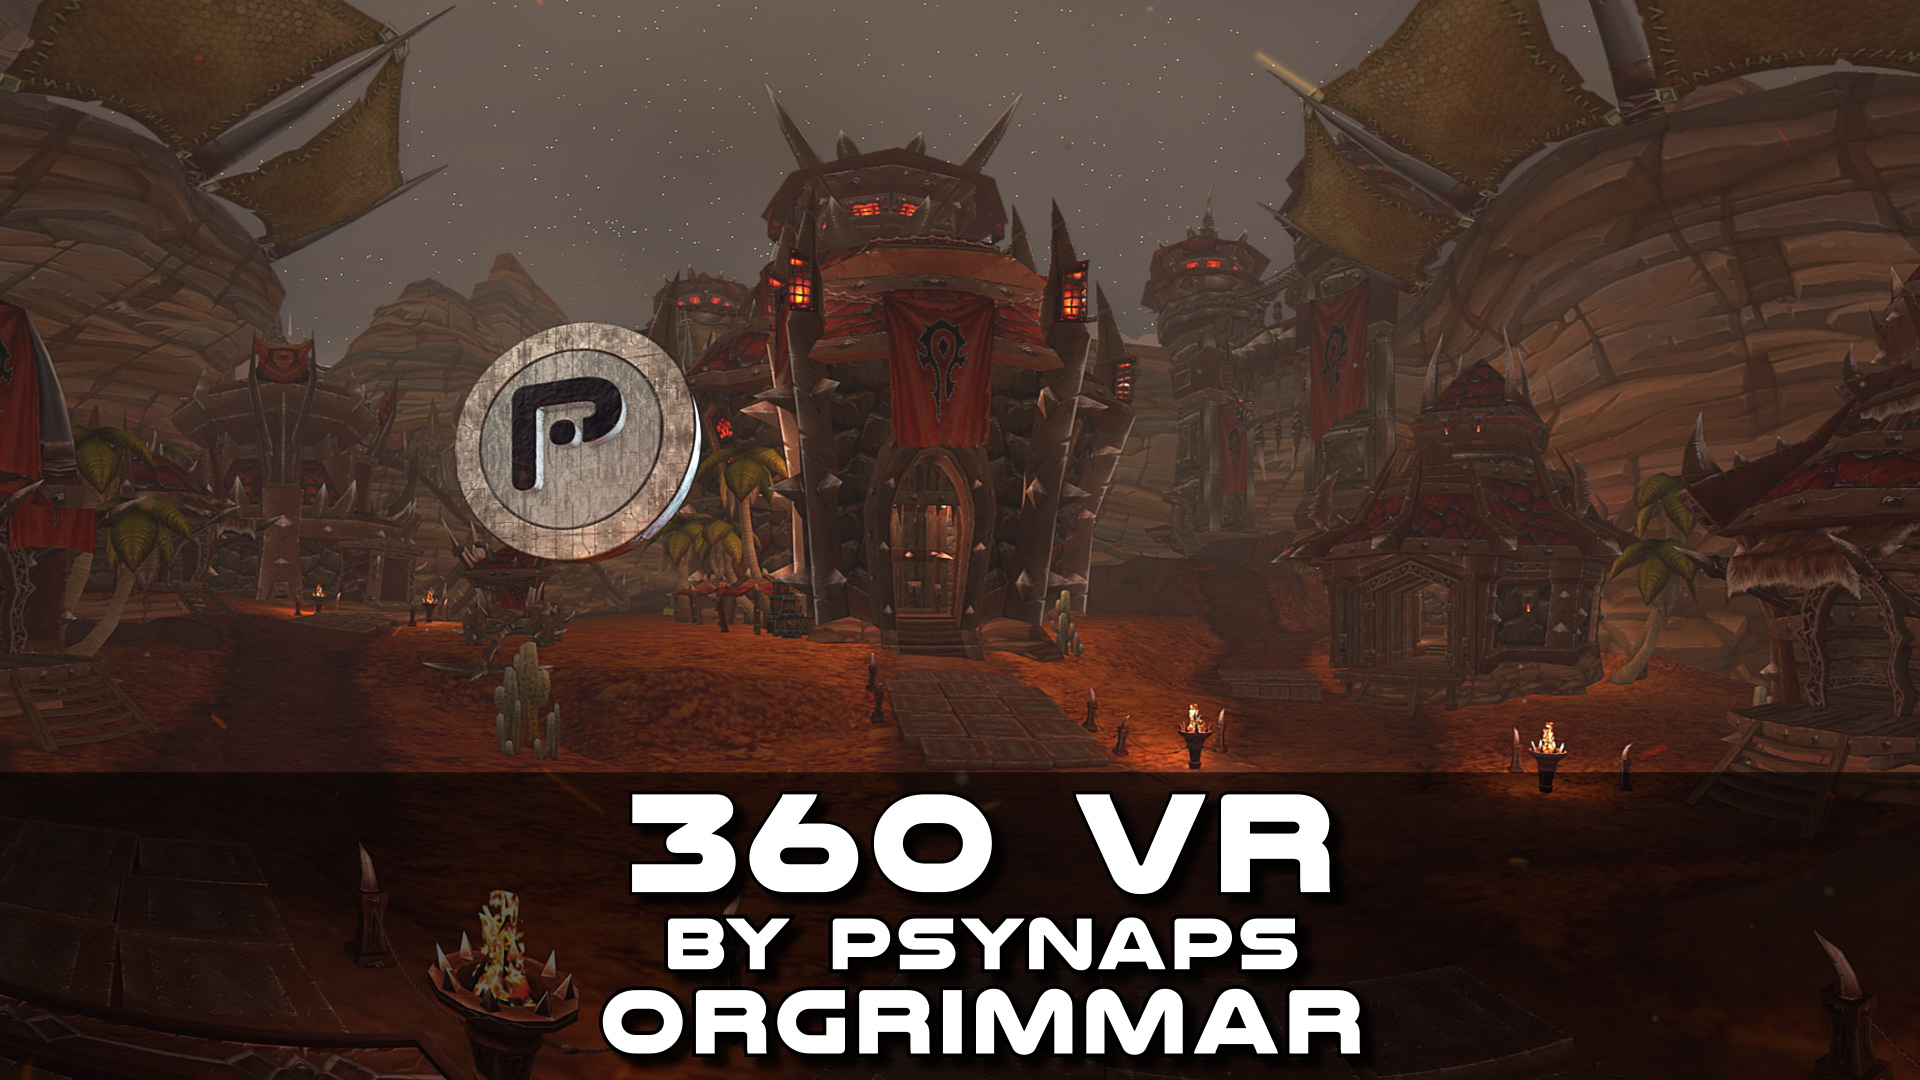 360 VR Orgrimmar by Psynaps